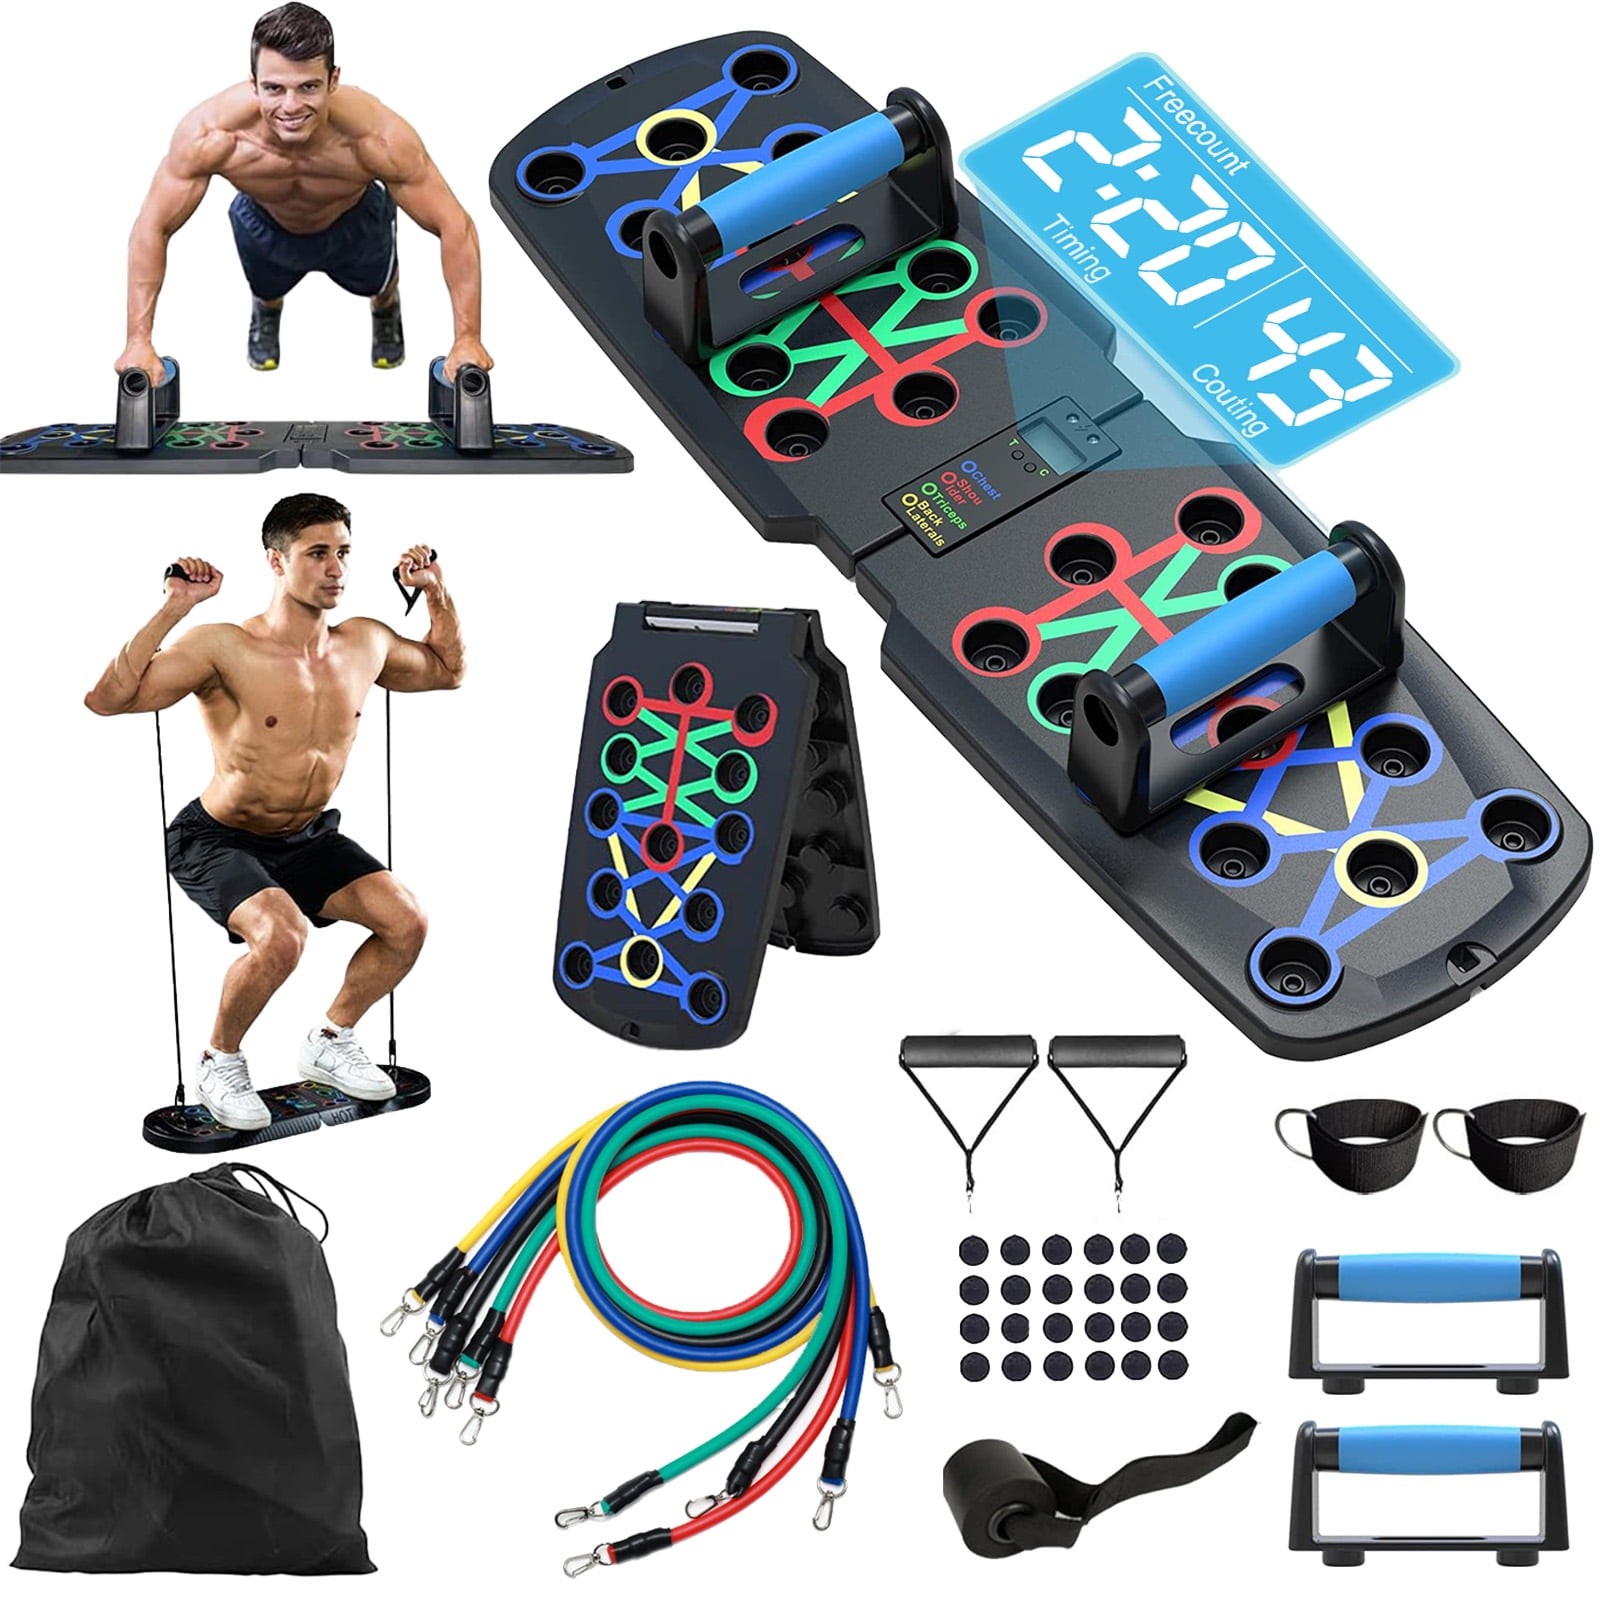 Goplus Portable Push Up Board, 33.5''x 20'' Home Gym Workout Equipment w/  16 Exercise Accessories, Tricep Bar, Resistance Bands, Ab Roller Wheel